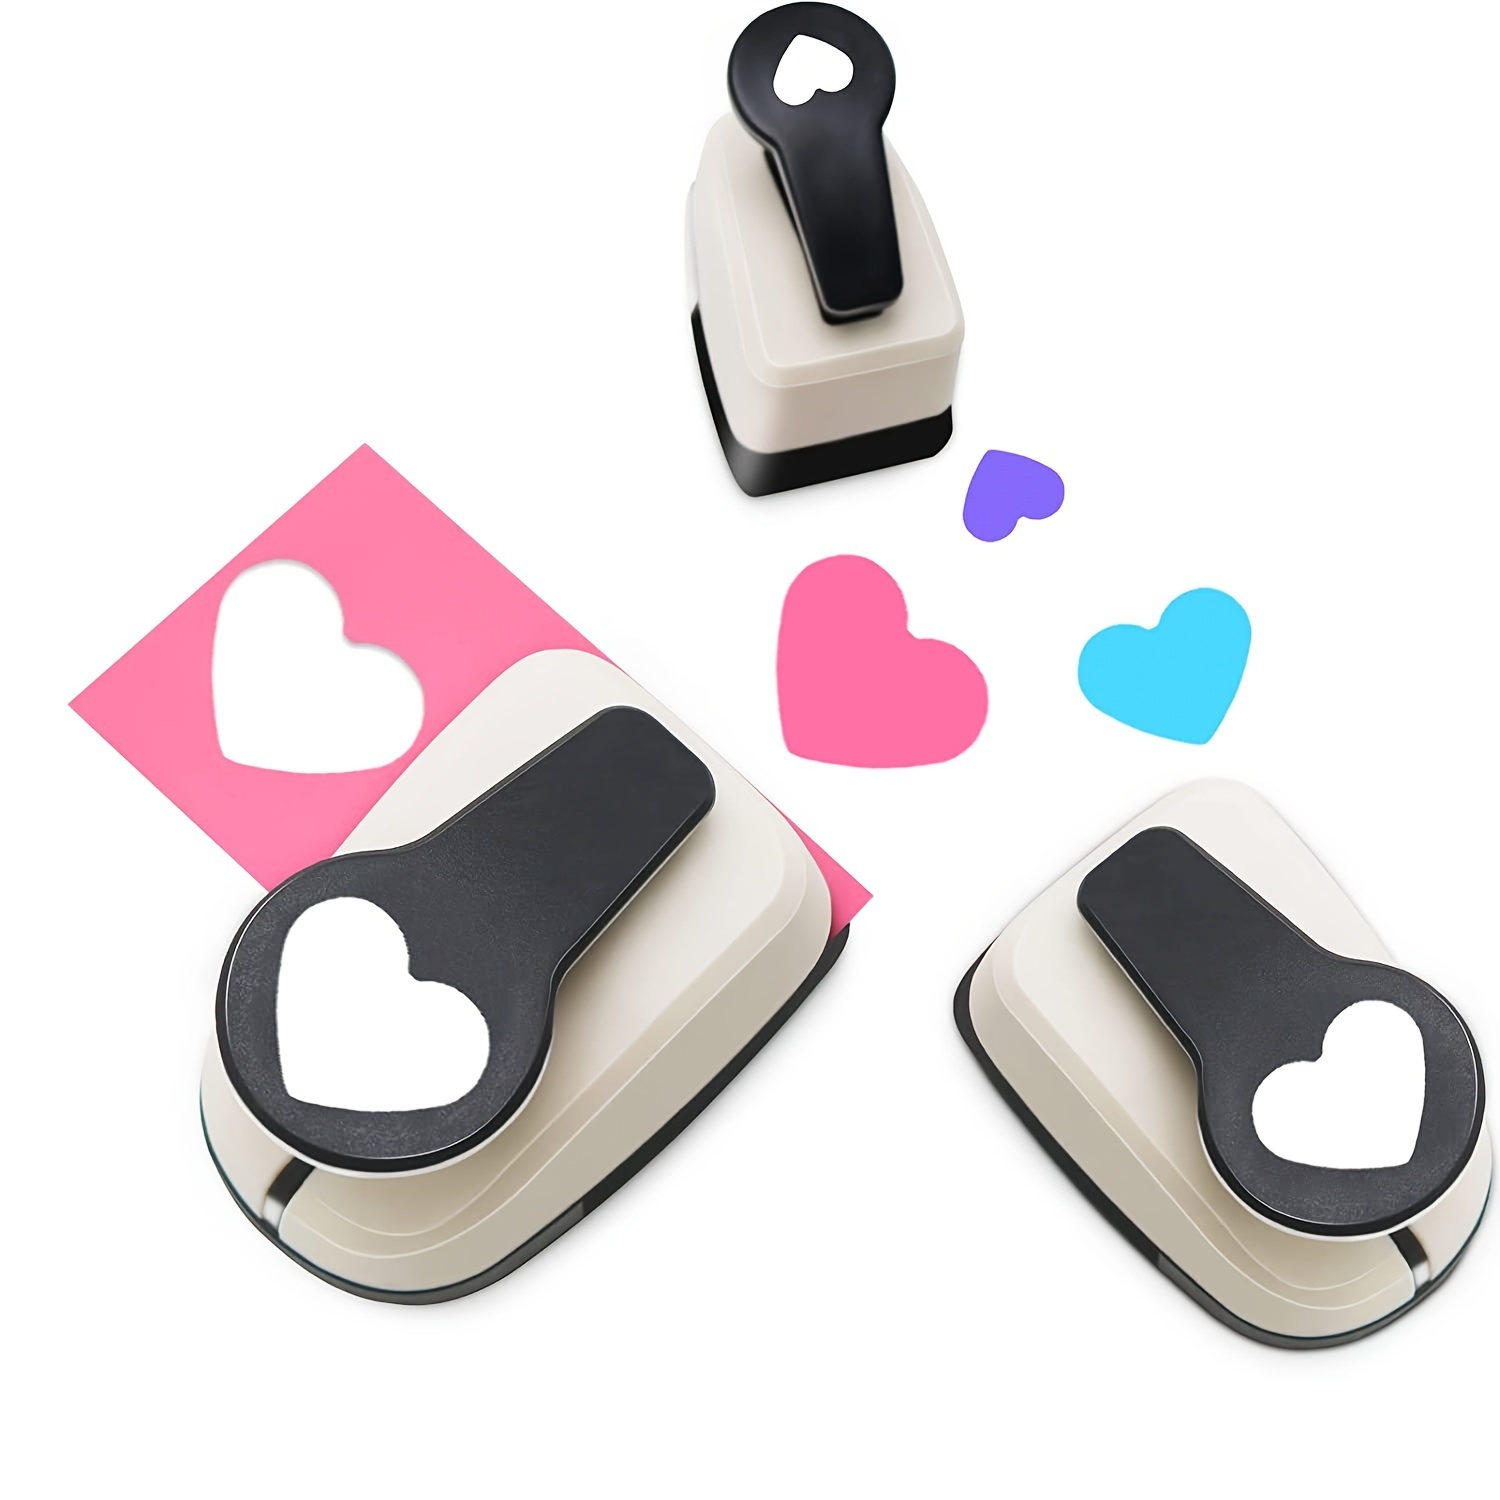  Paper Hole Puncher For Crafts, One Hole Punch